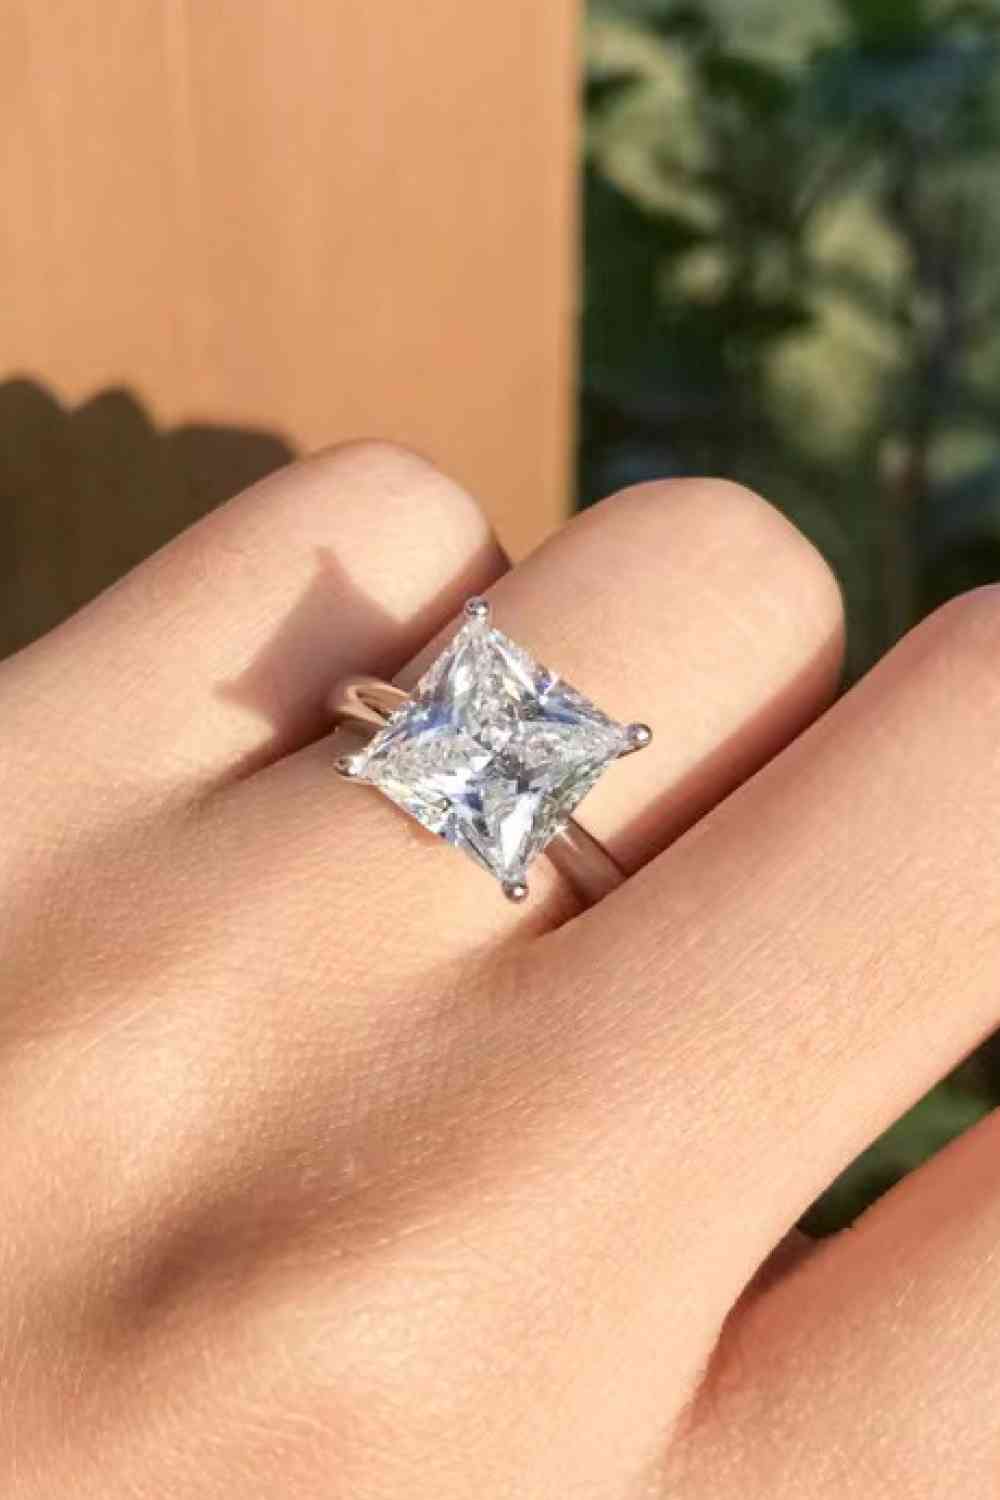 a close up of a person's hand wearing a ring with a princess cut